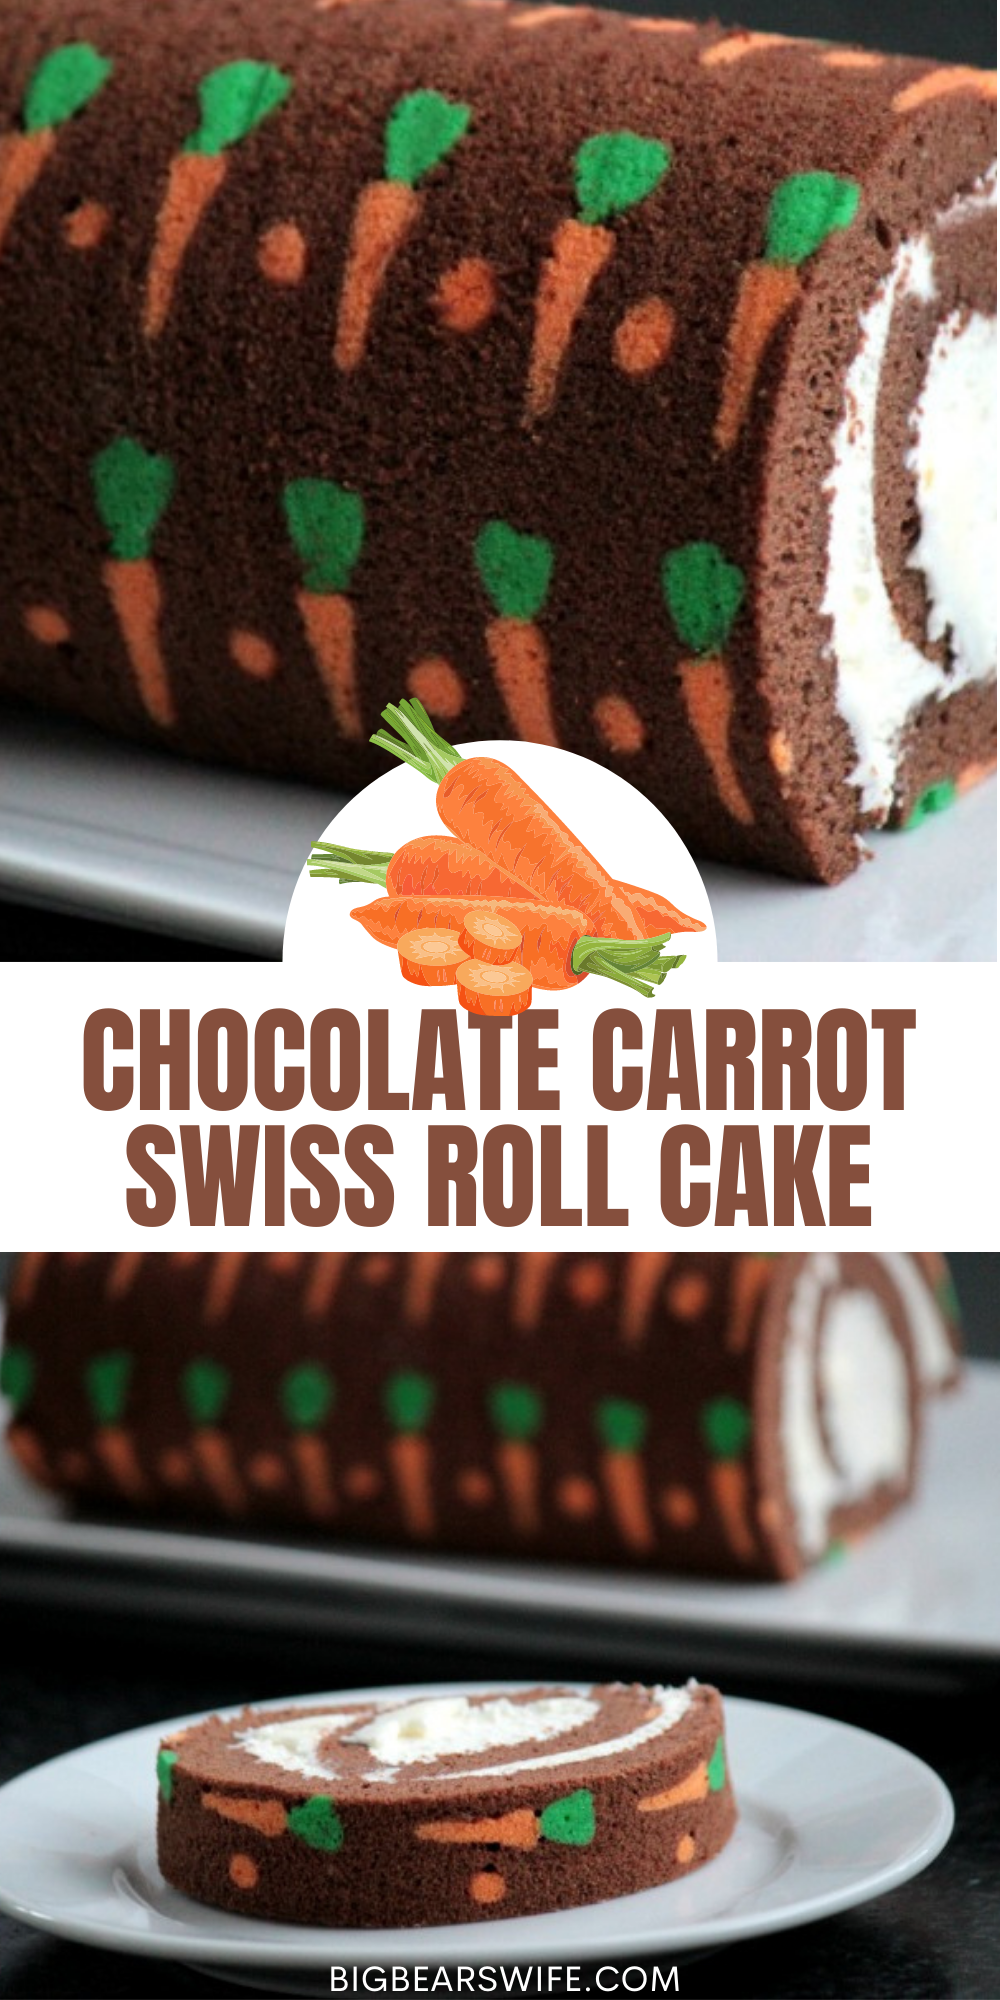 This Chocolate Carrot Swiss Roll Cake is a chocolate sponge cake with super cute mini cake carrots baked right in! Then this “carrot” cake is filled with a cream cheese frosting and rolled up into a giant swiss roll cake!
 via @bigbearswife